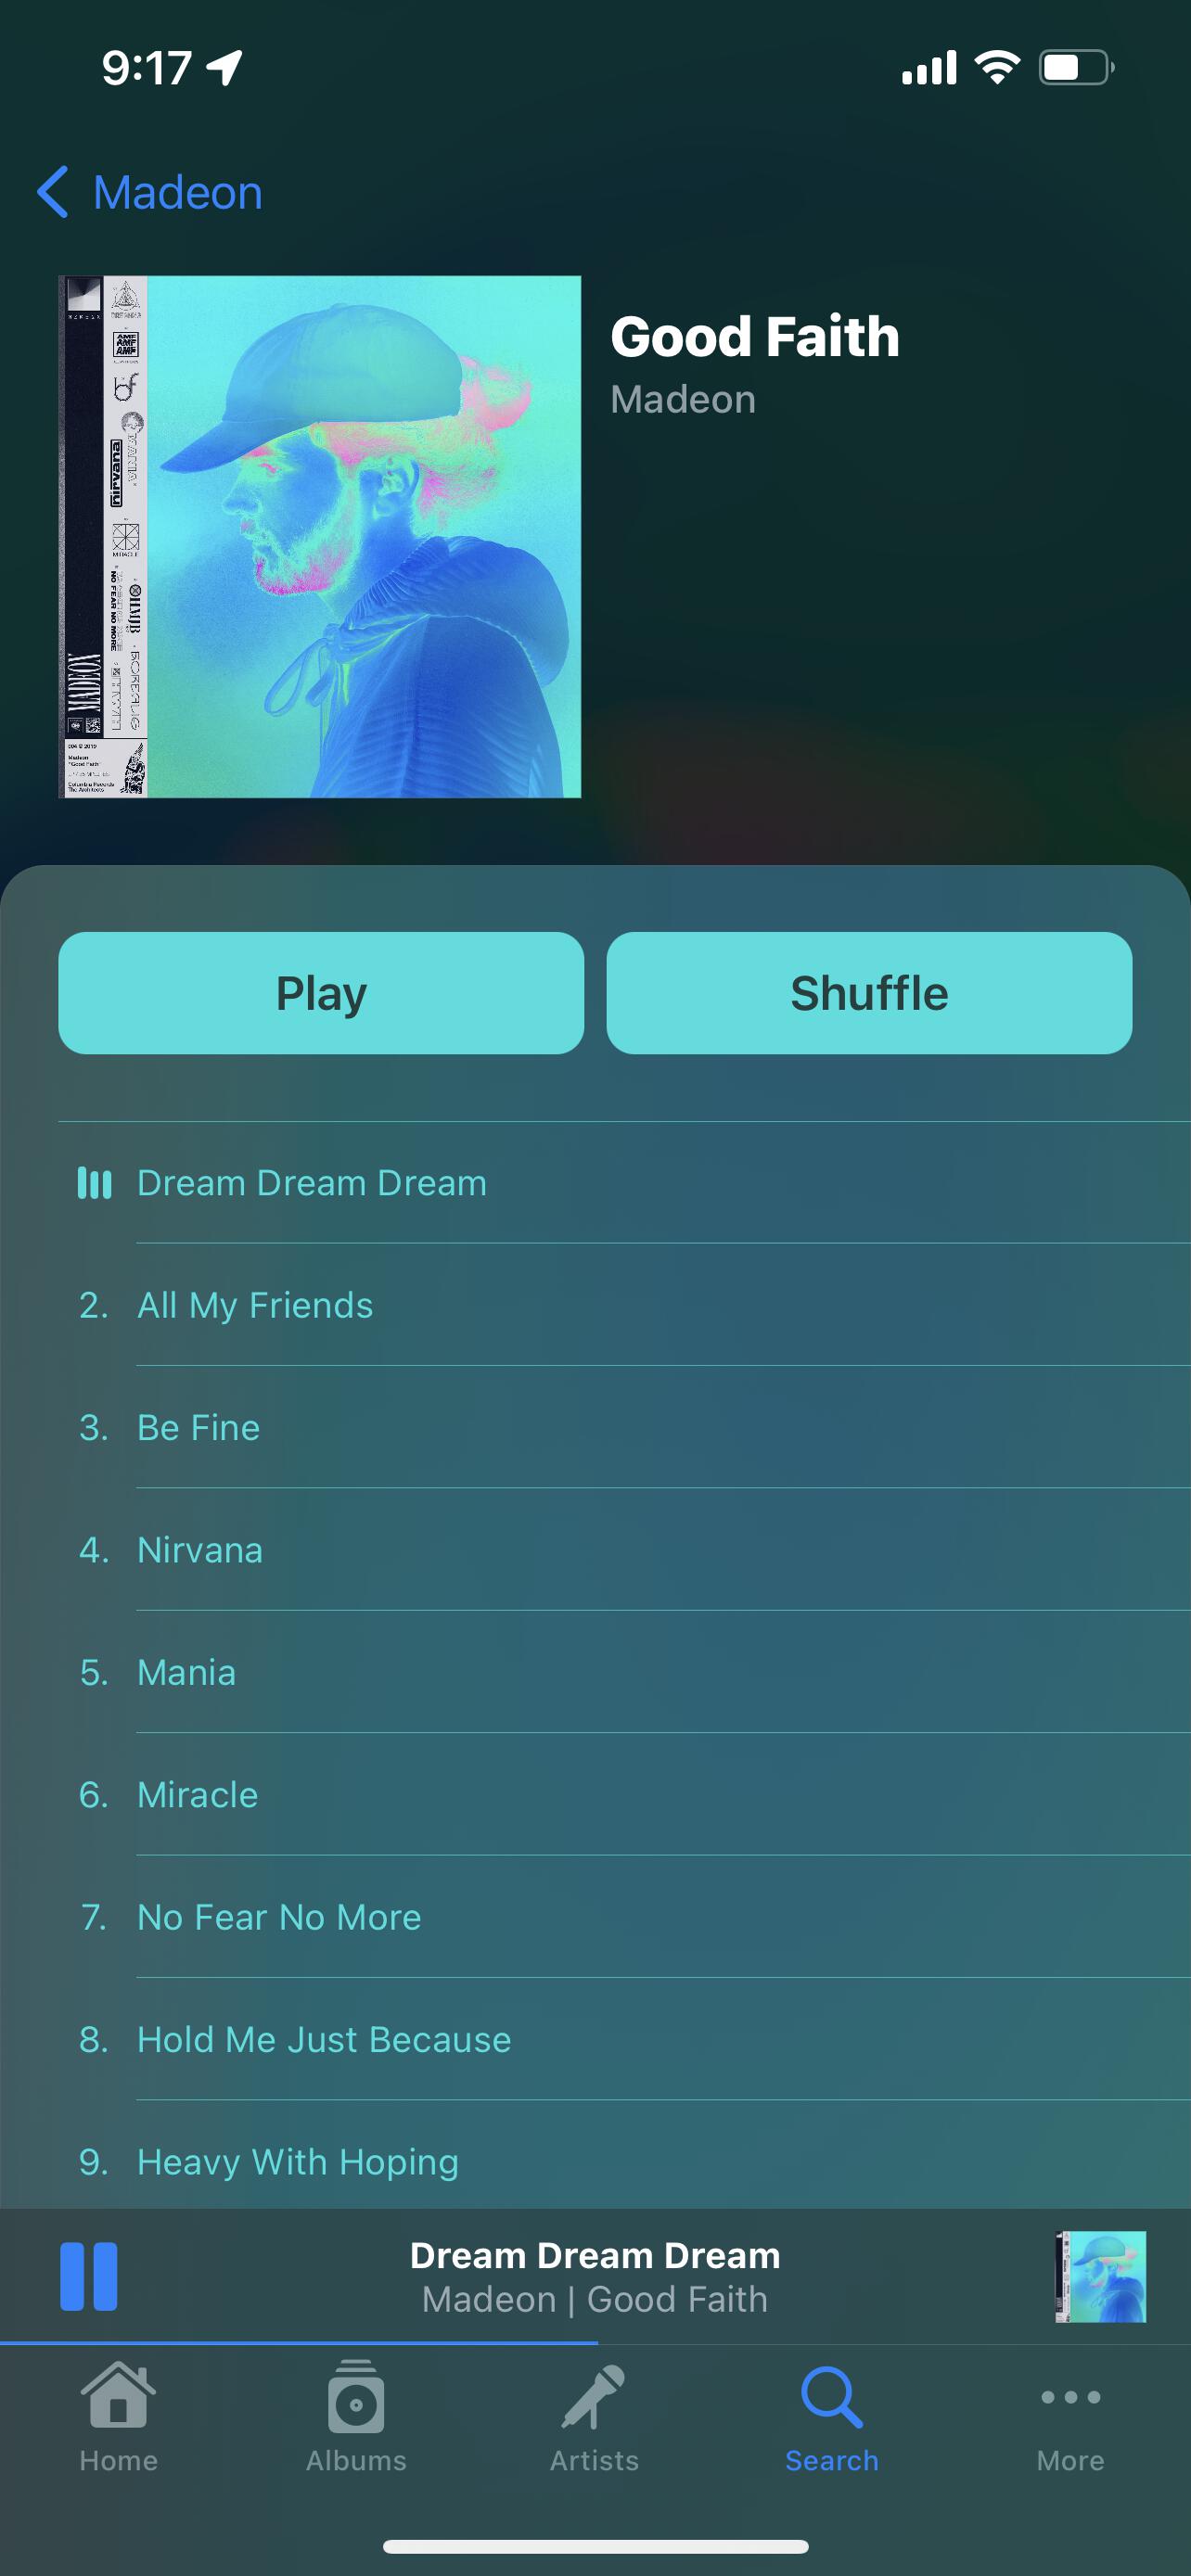 Image of the album view in dark mode with a predominantly blue record